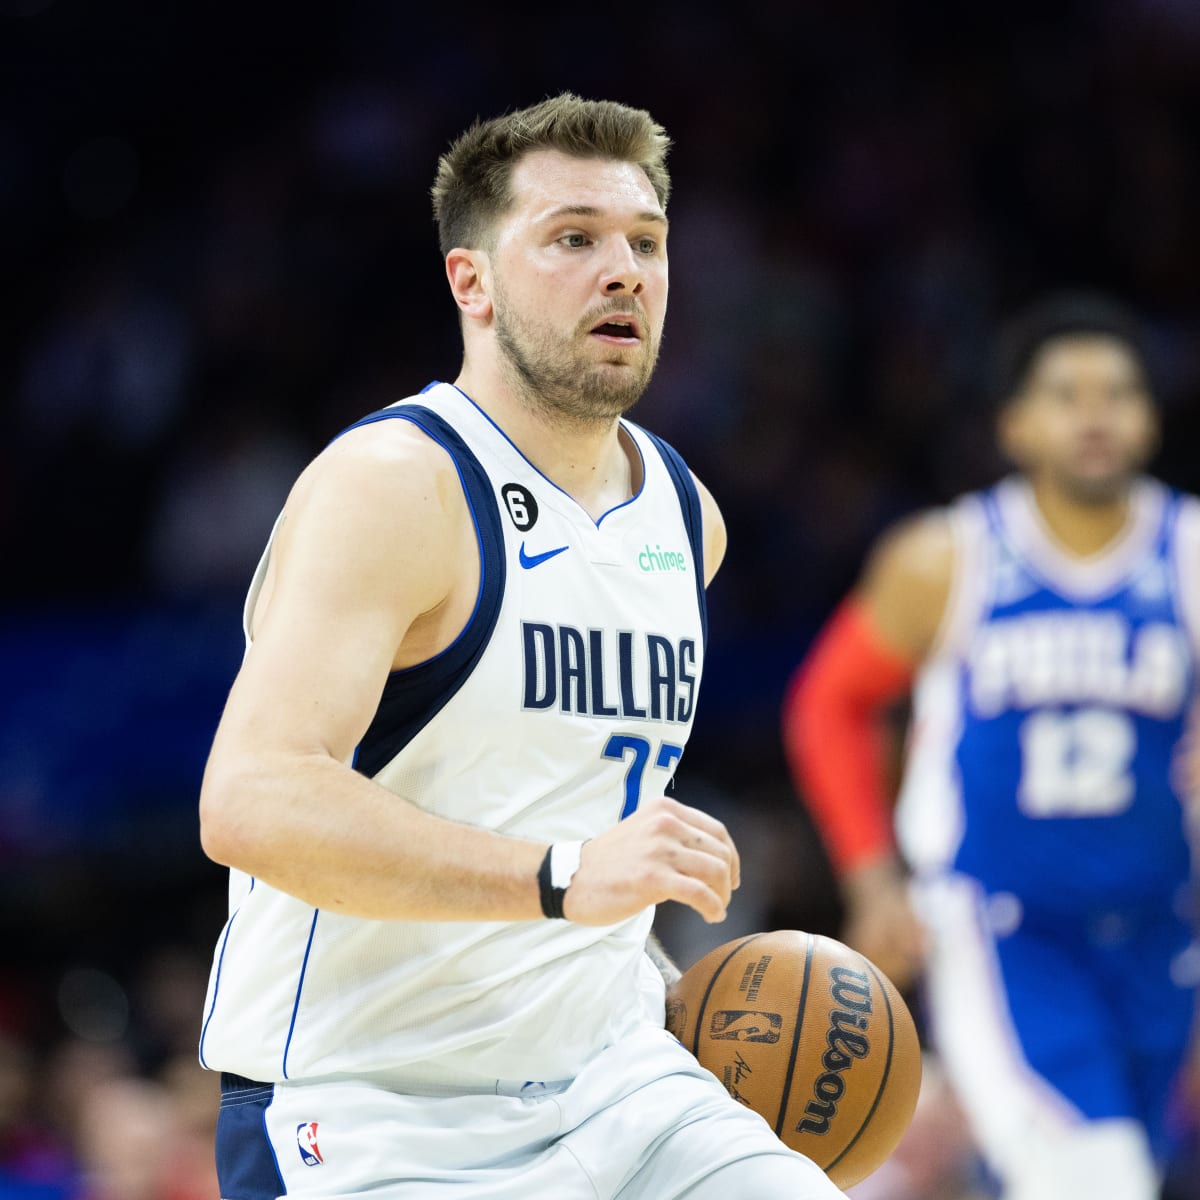 𝐓𝐚𝐥𝐤𝐢𝐧' 𝐍𝐁𝐀 on X: Luka Doncic at age 23 vs. Michael